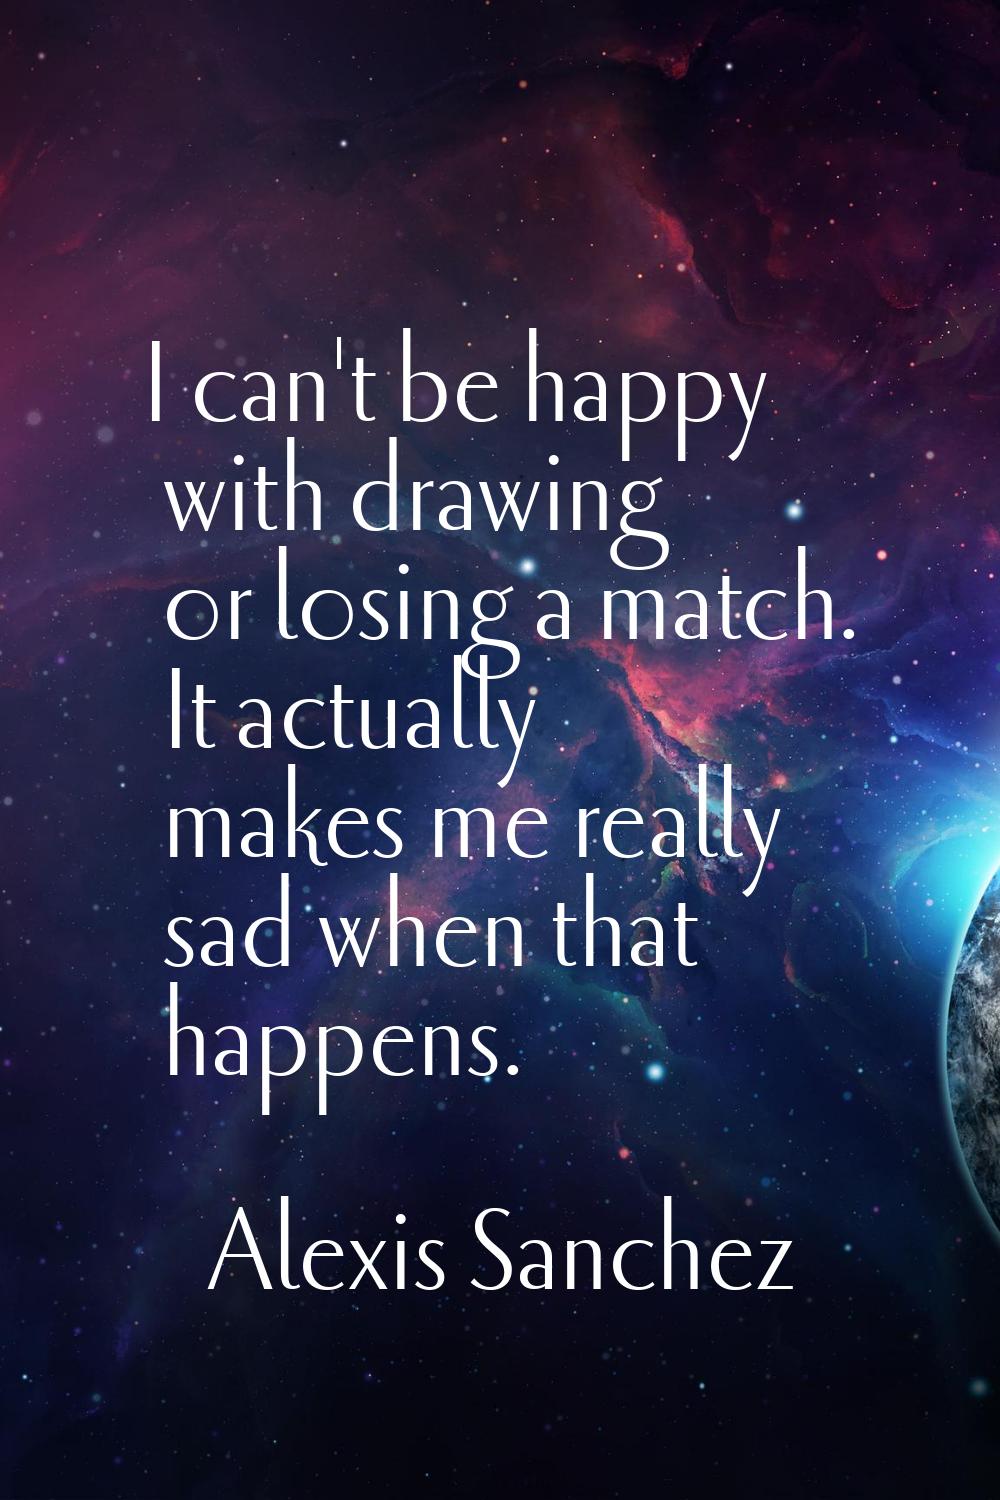 I can't be happy with drawing or losing a match. It actually makes me really sad when that happens.